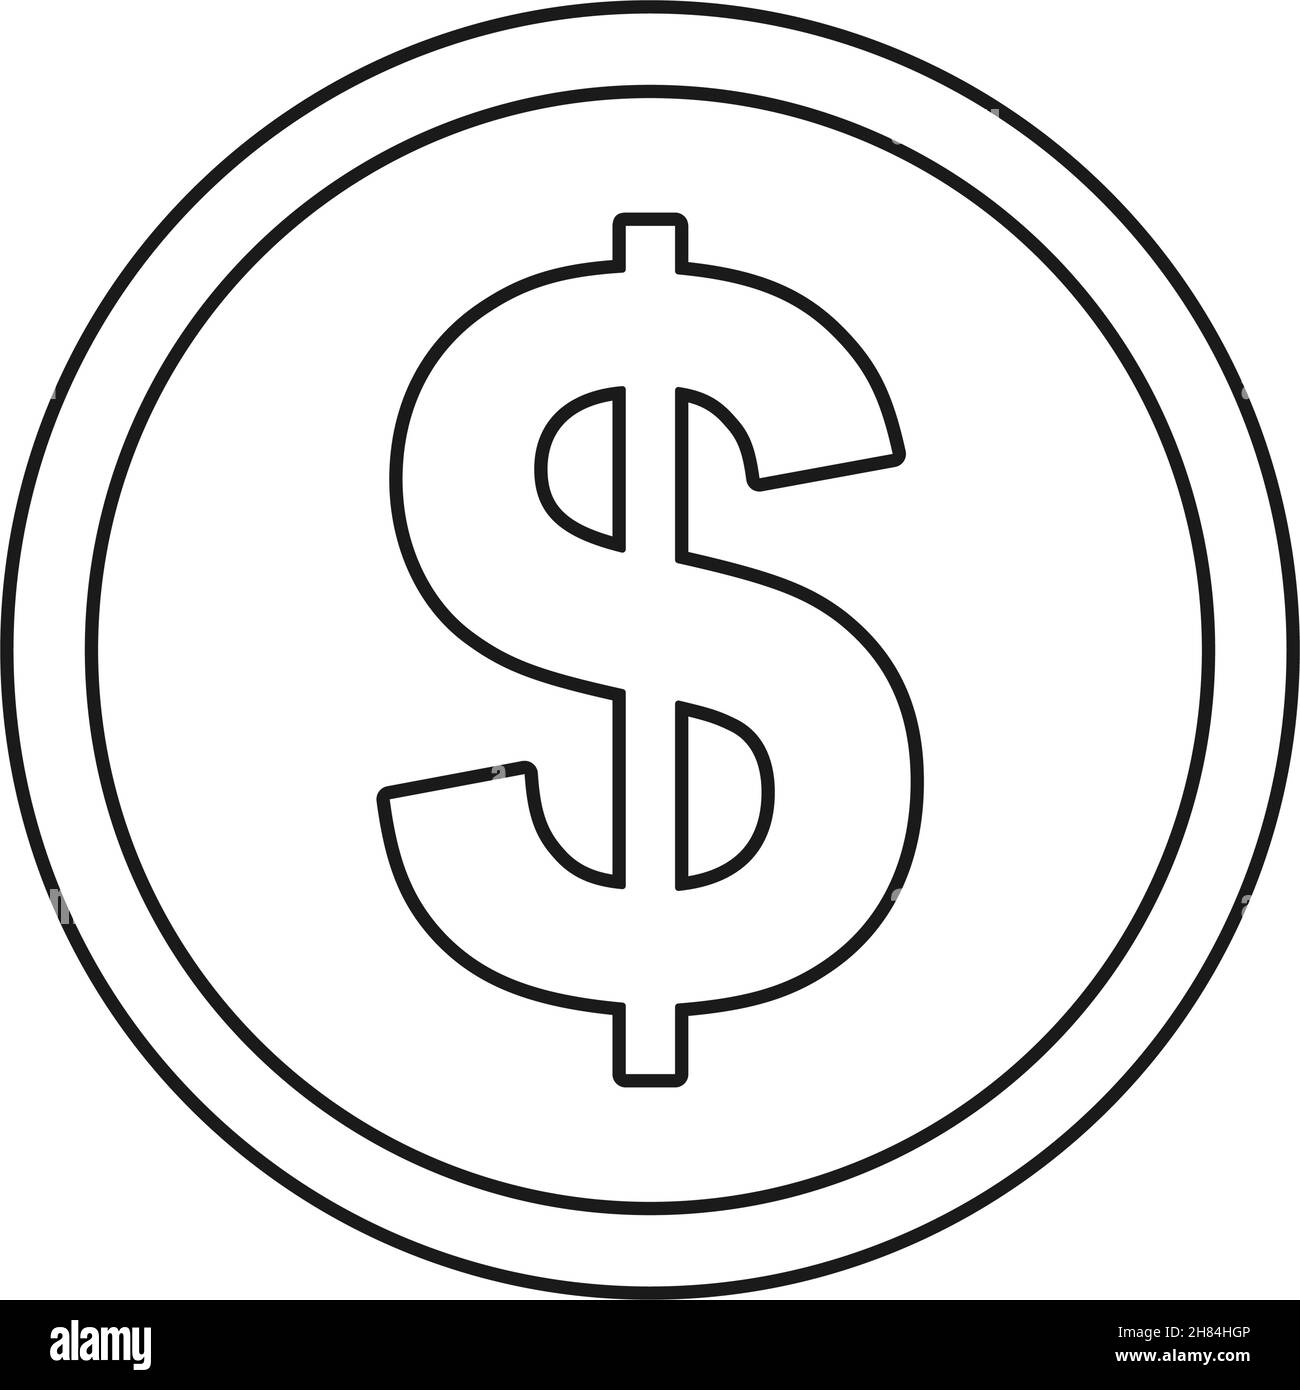 Coin with dollar symbol outline in vector icon Stock Vector